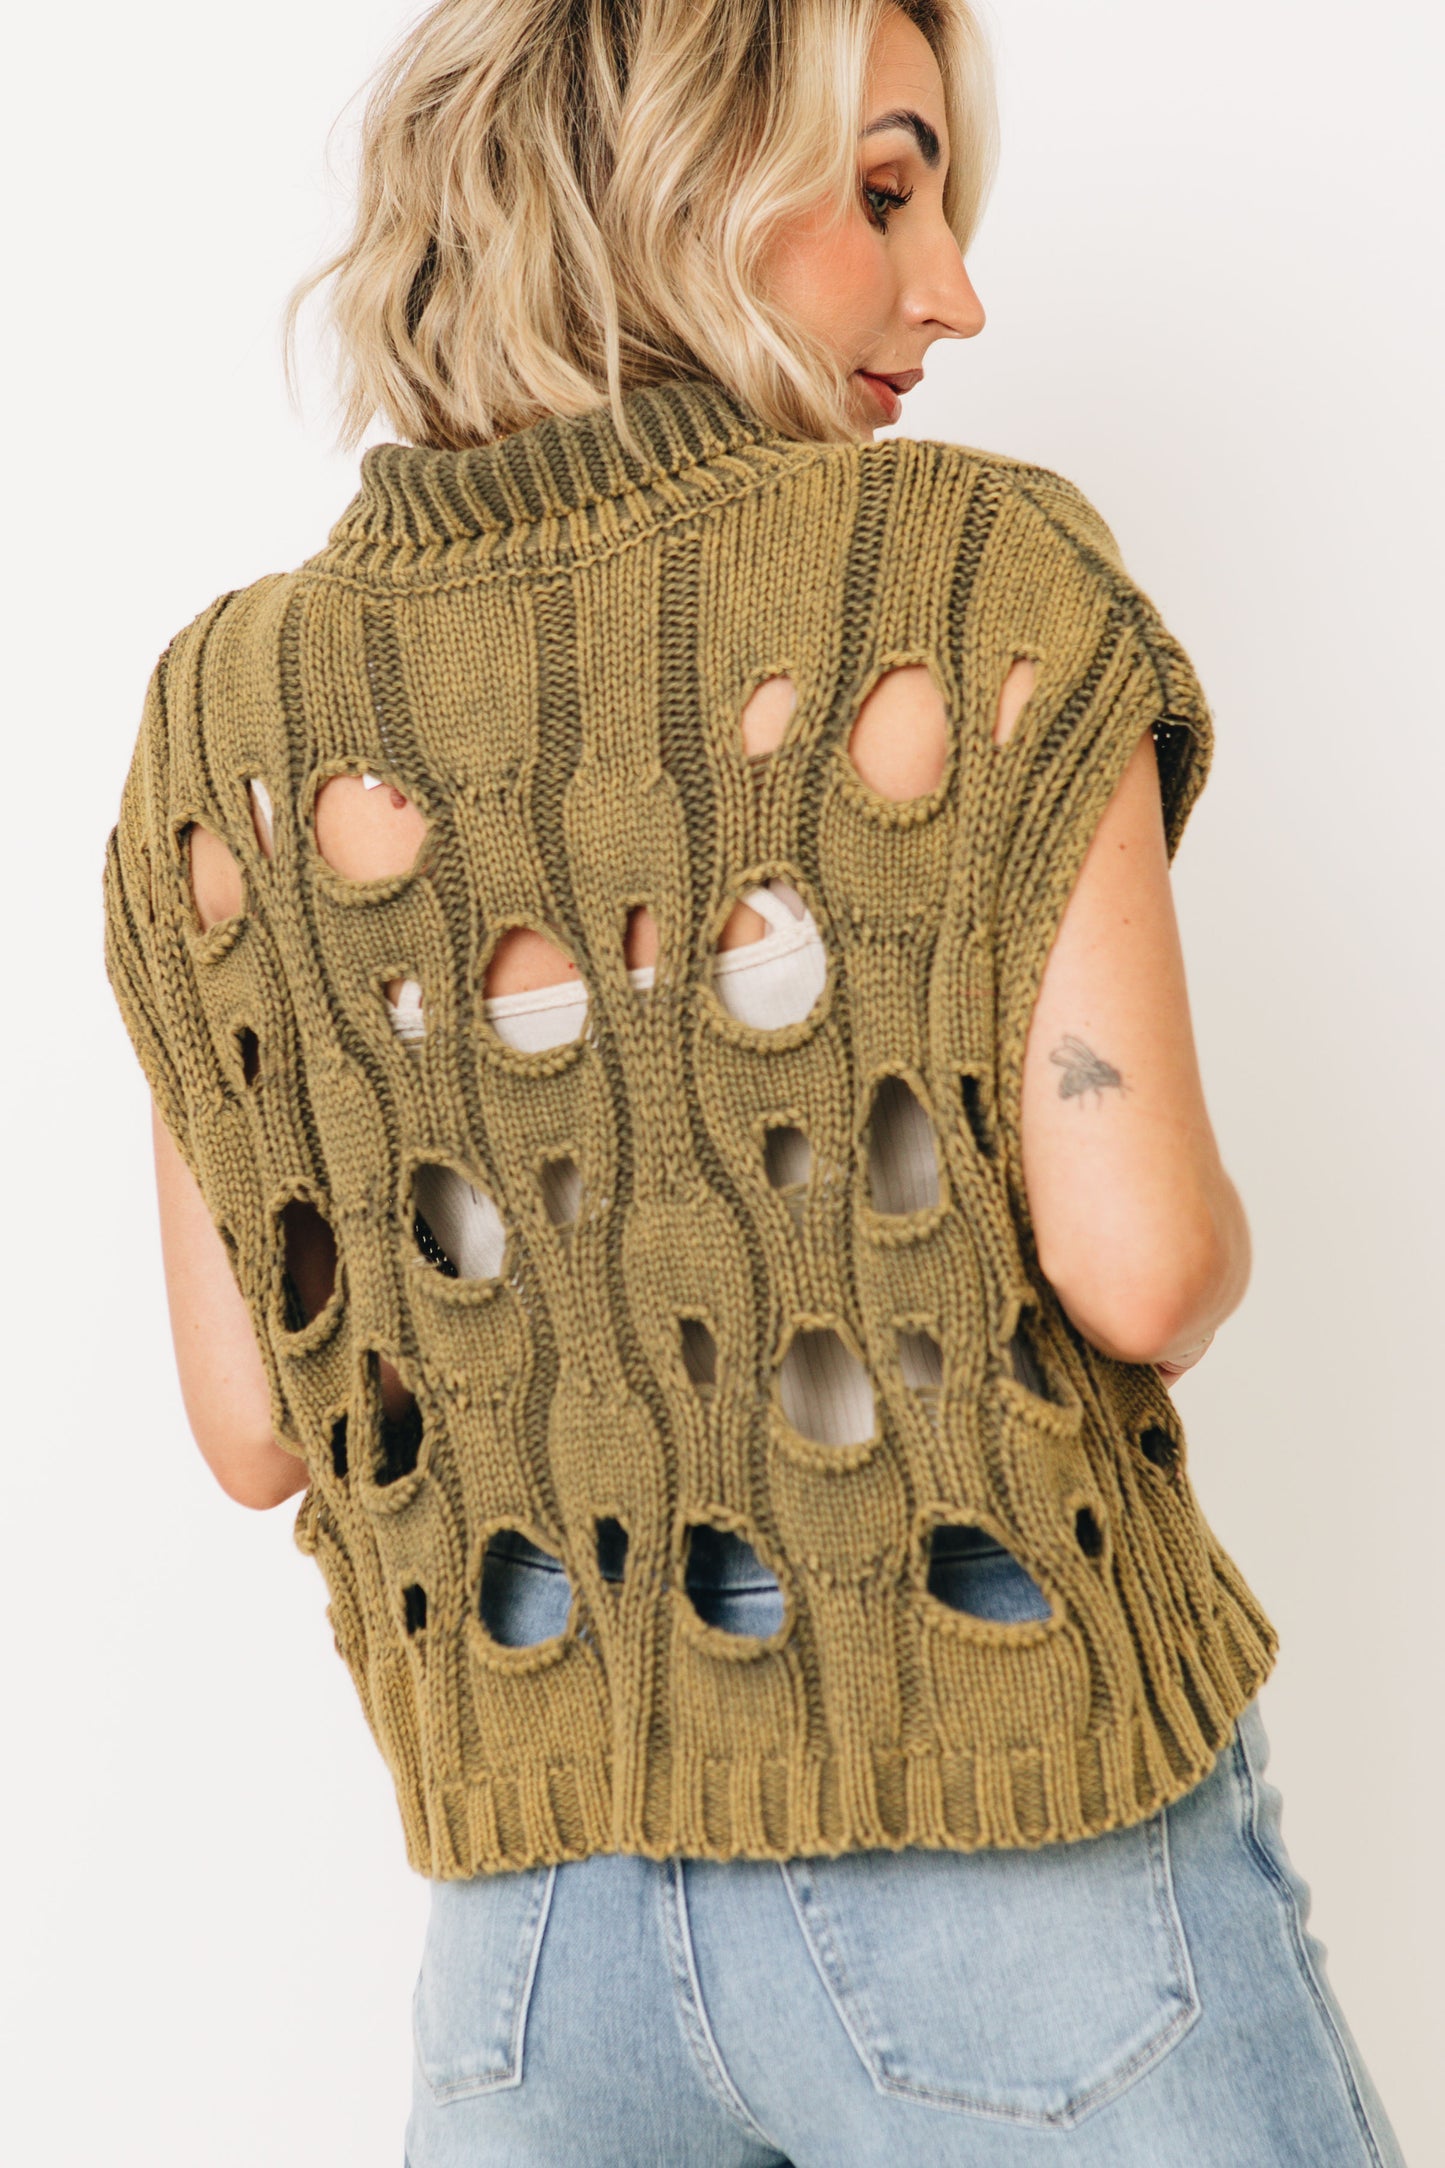 RESTOCK EXPECTED 10/2 - Distressed Mineral Washed Sweater Vest (S-XL)